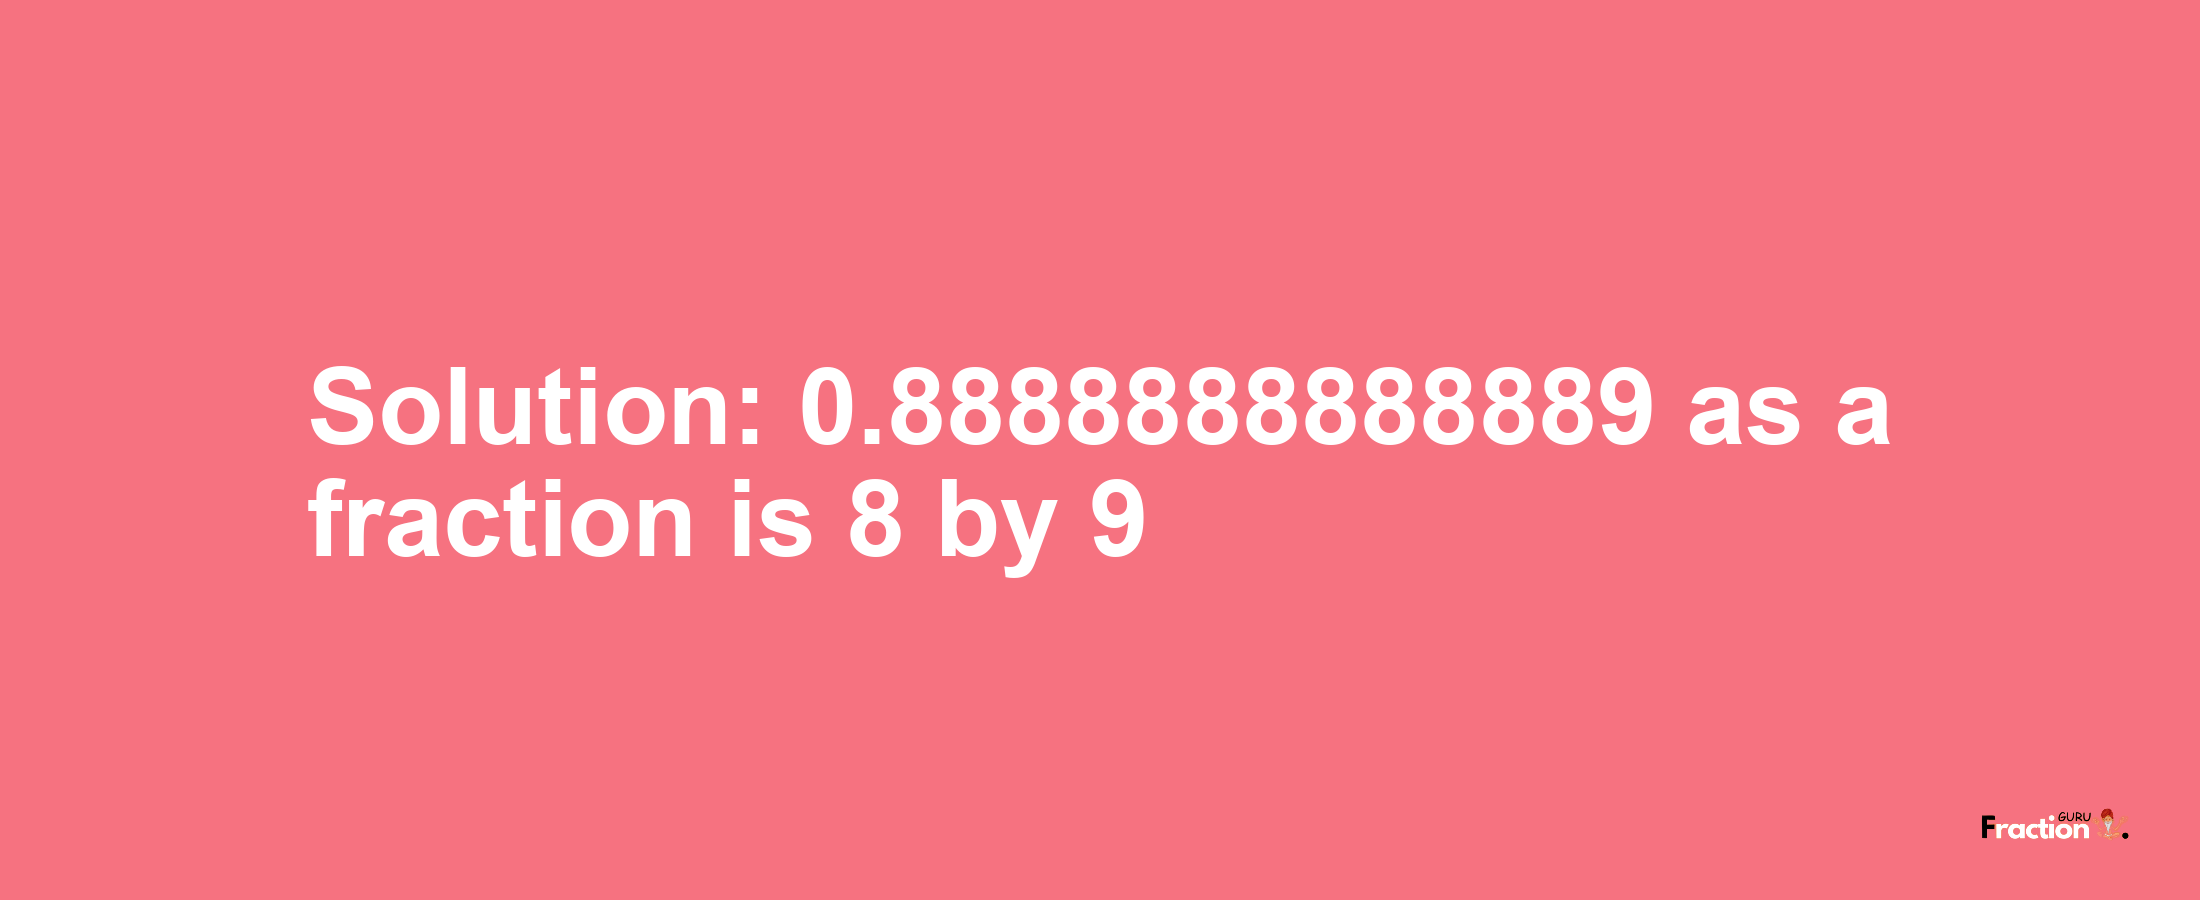 Solution:0.8888888888889 as a fraction is 8/9